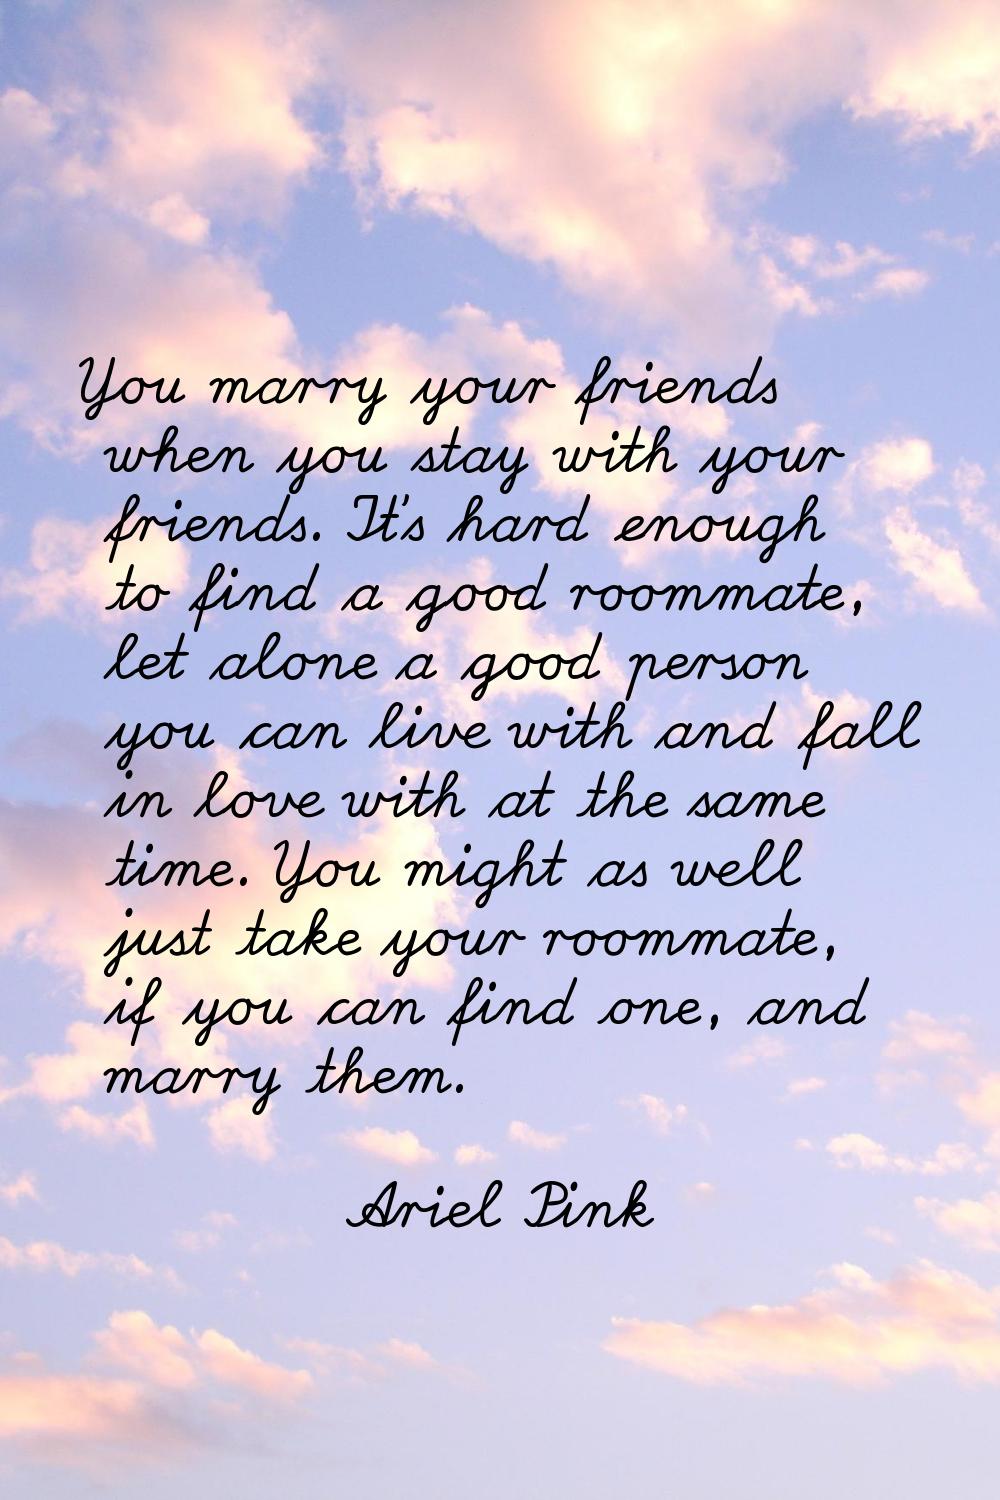 You marry your friends when you stay with your friends. It's hard enough to find a good roommate, l